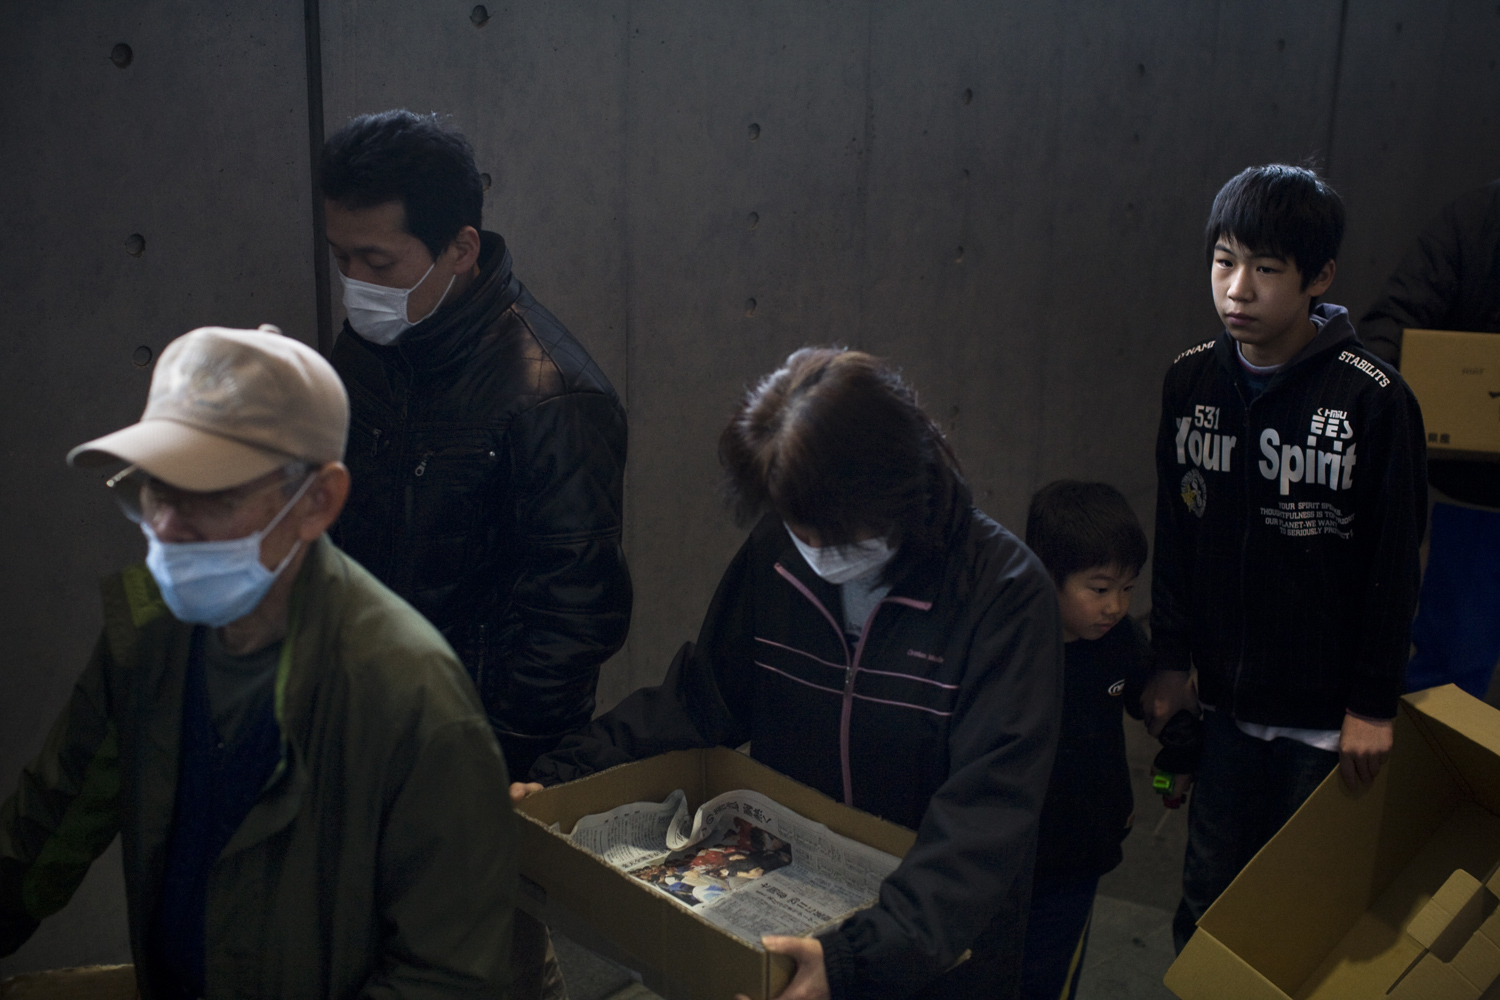 Evacuee's in Tokyo, many of which come from the Fukushima prefecture, wait in line for food at the Saitama Super Arena where close to 5000 people seek shelter and aid. March 22, 2011